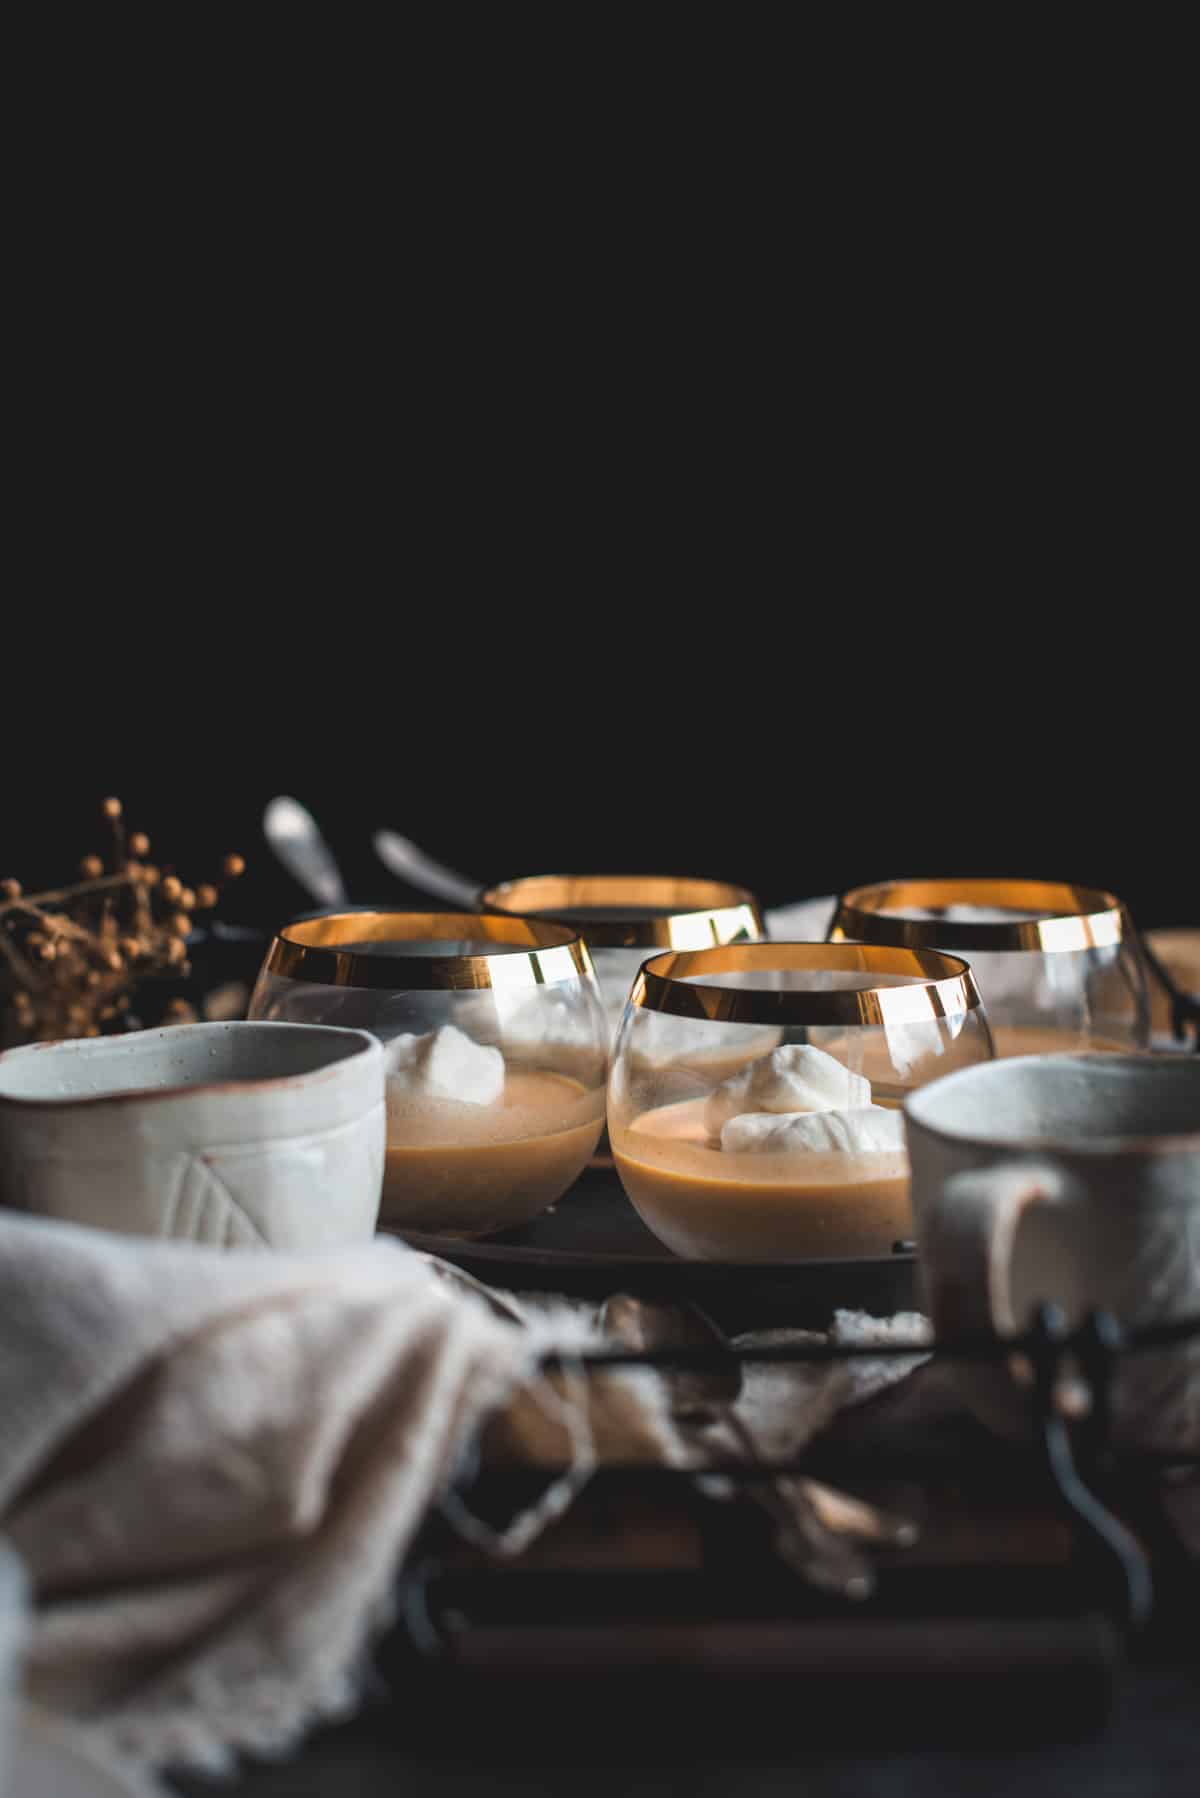 4 small gold rimmed glass bowls are filled with Pumpkin Panna Cotta and topped with whipped cream. There is various other items on the dark colored table like ceramic bowls and jugs, and dried flowers.